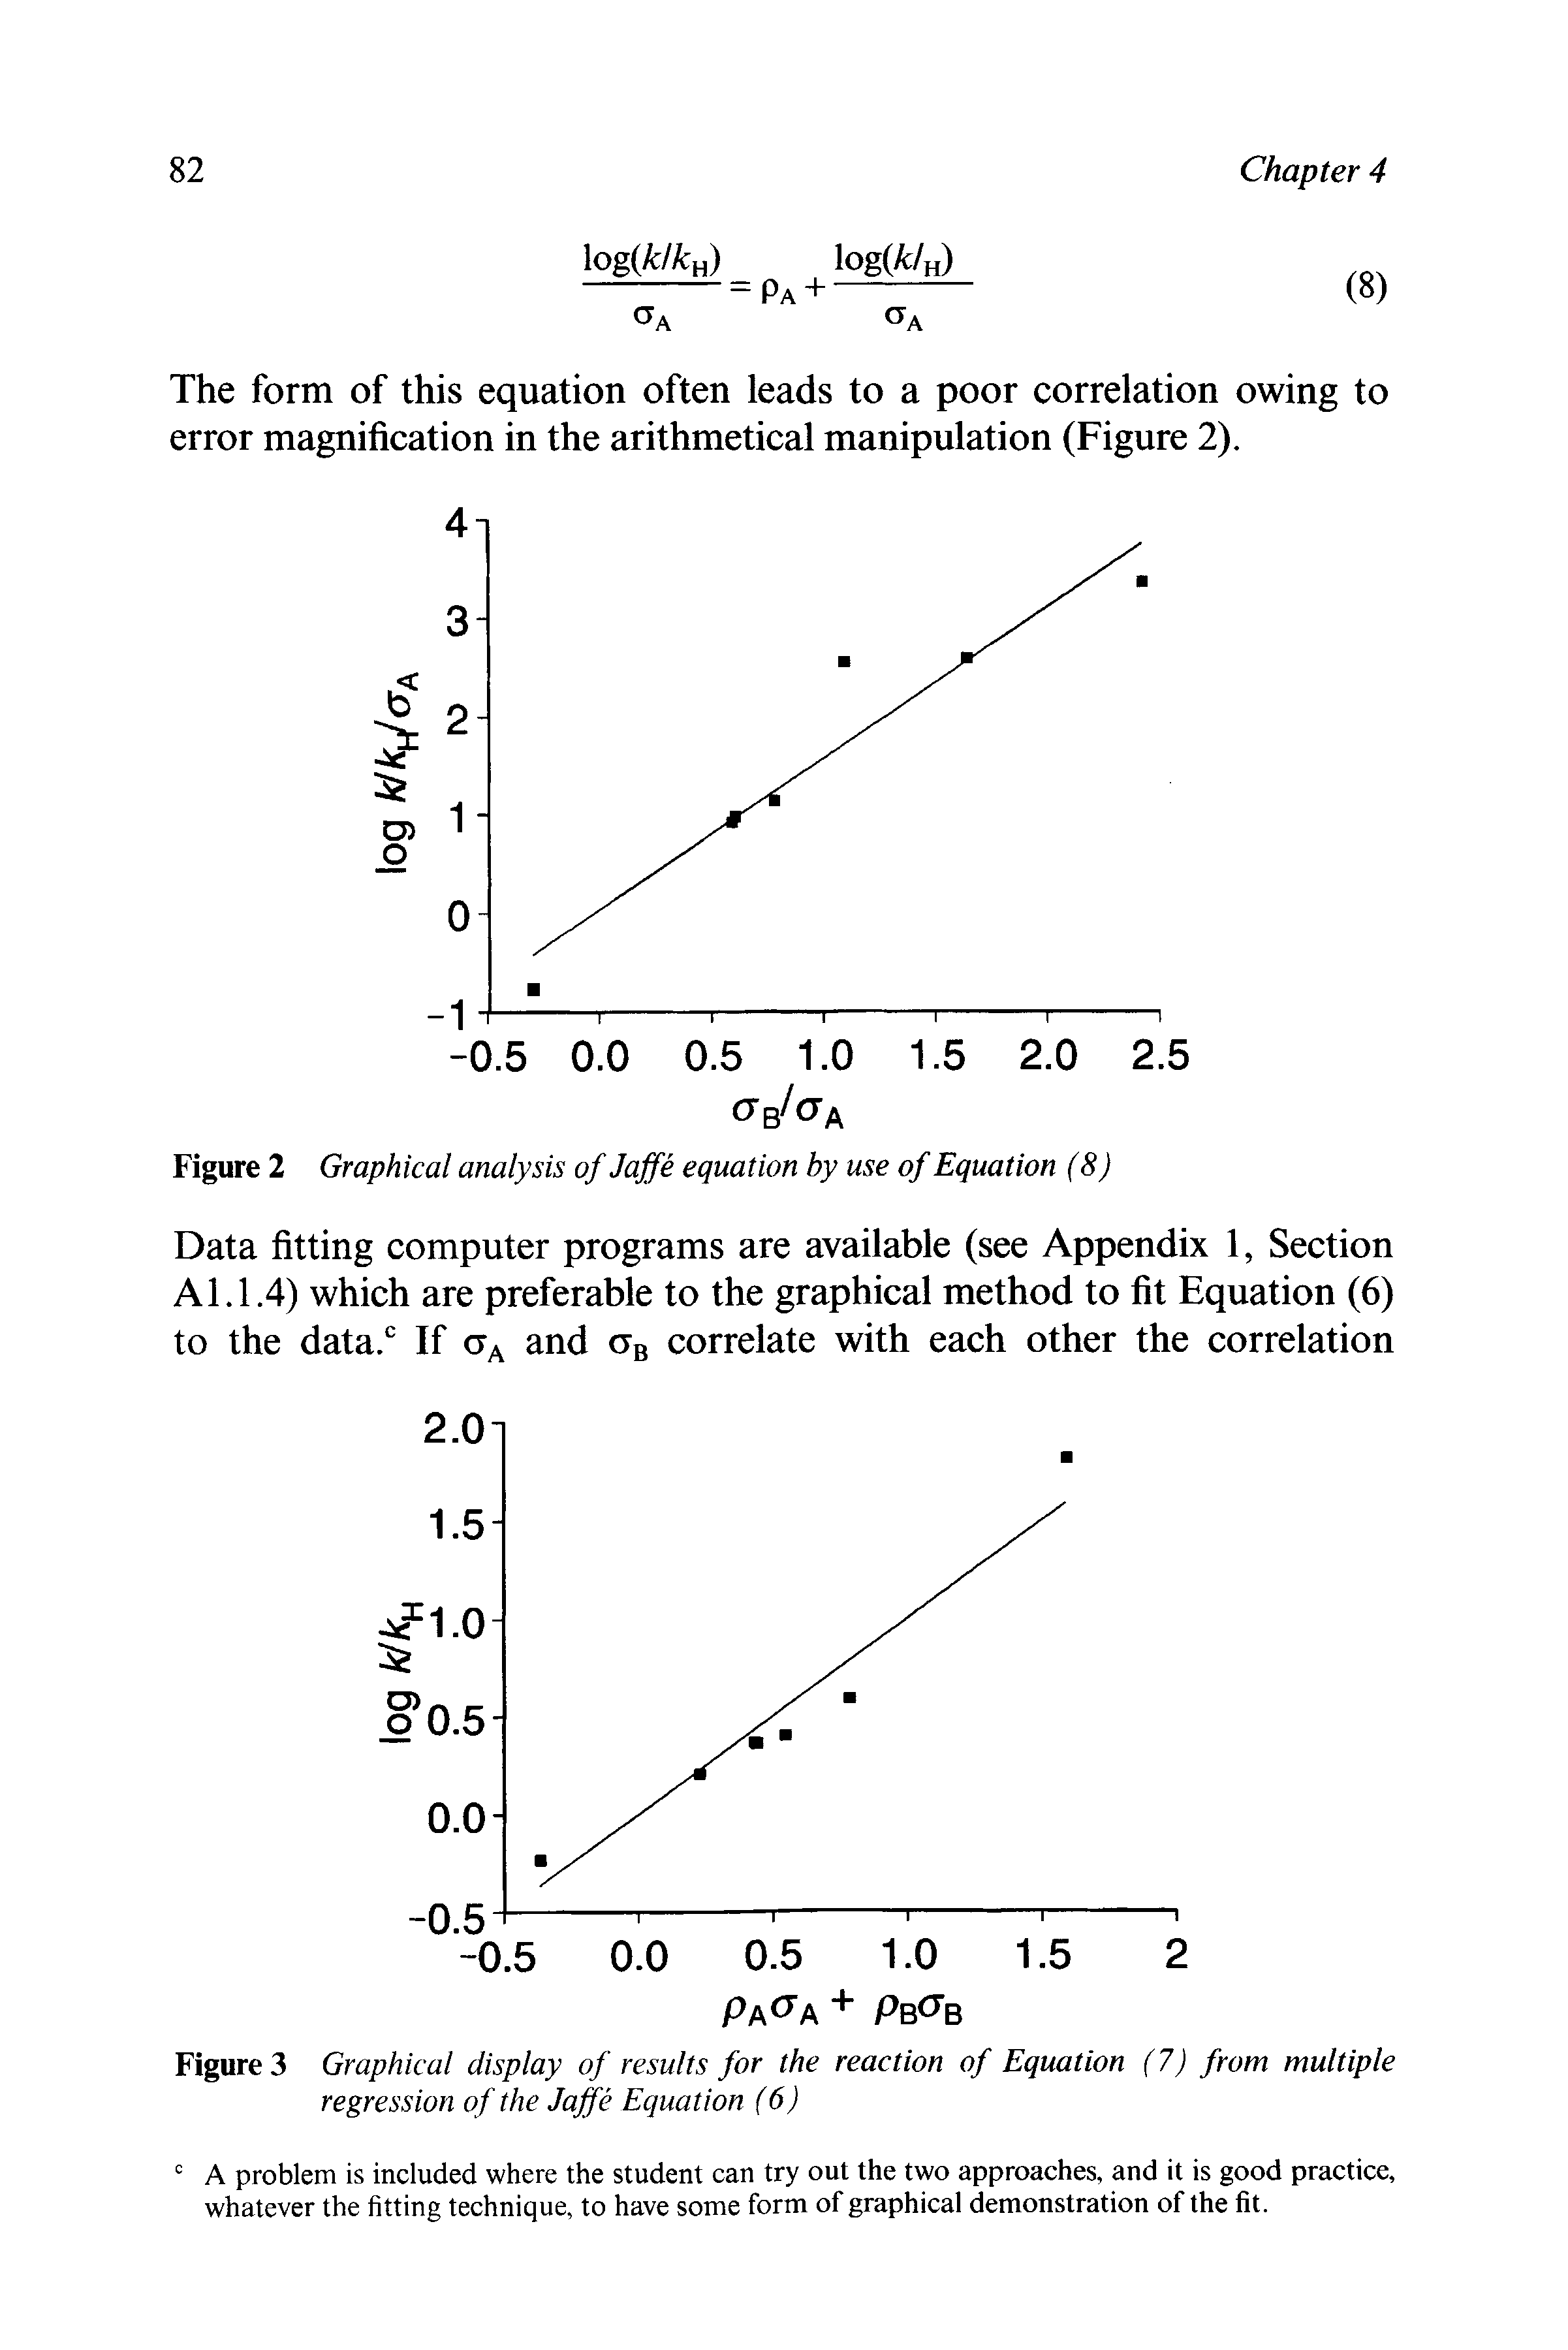 Figure 2 Graphical analysis of Jaffe equation by use of Equation (8)...